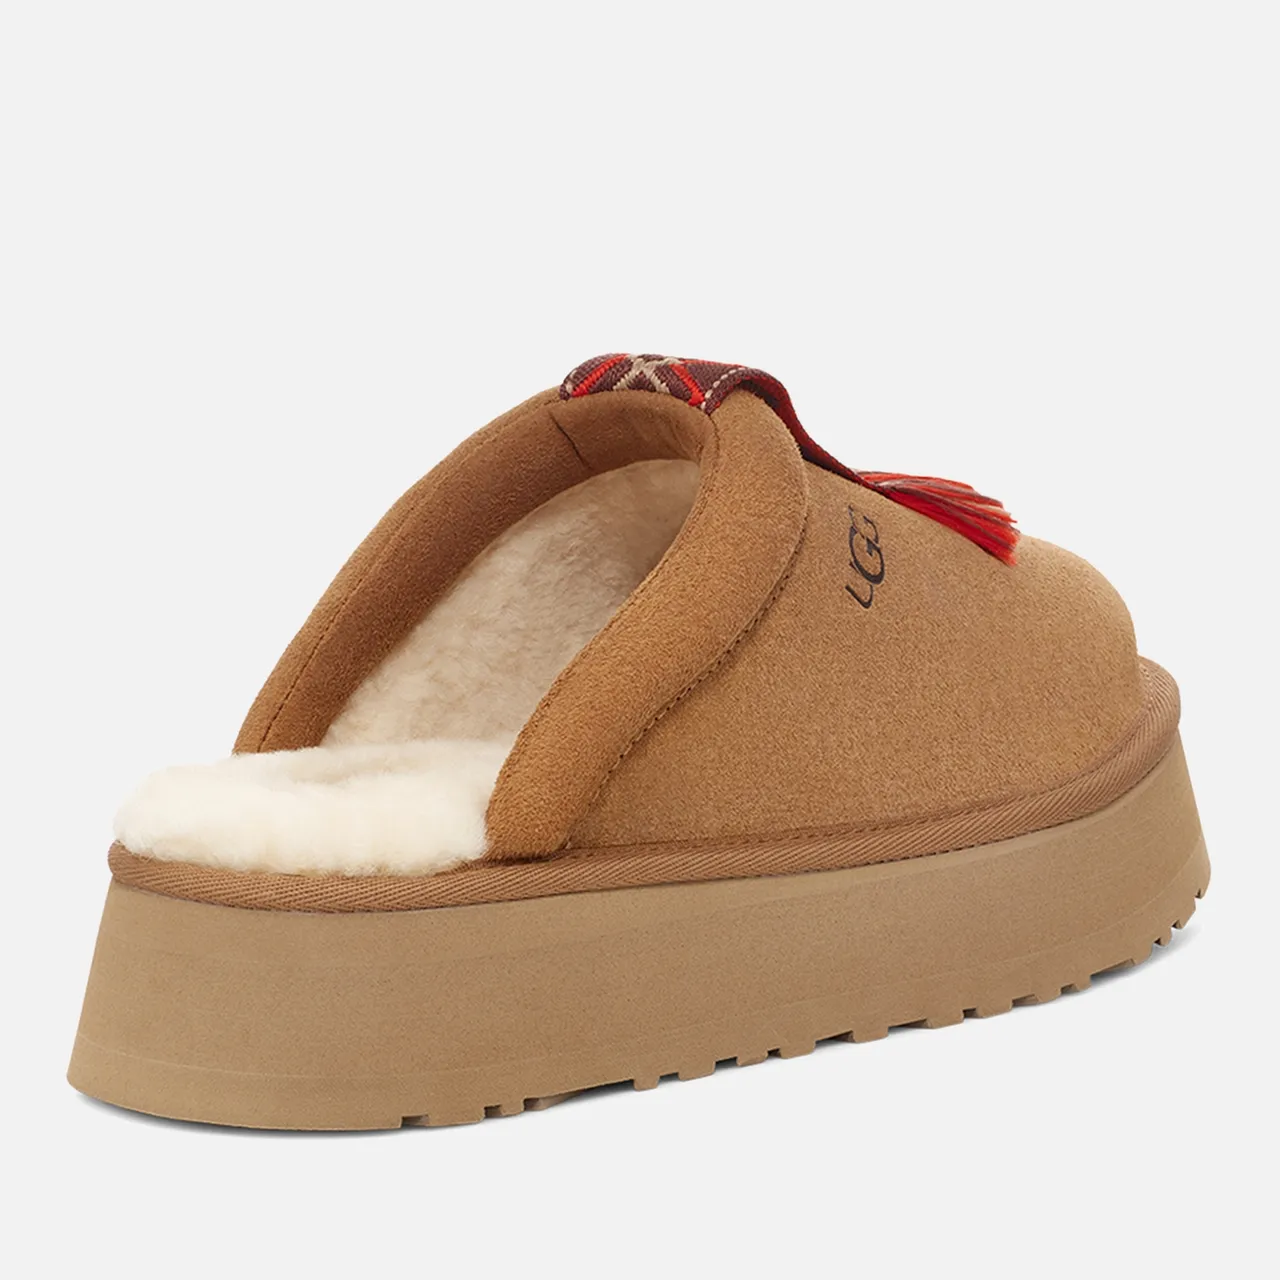 UGG Women's Tazzle Suede Slippers - UK